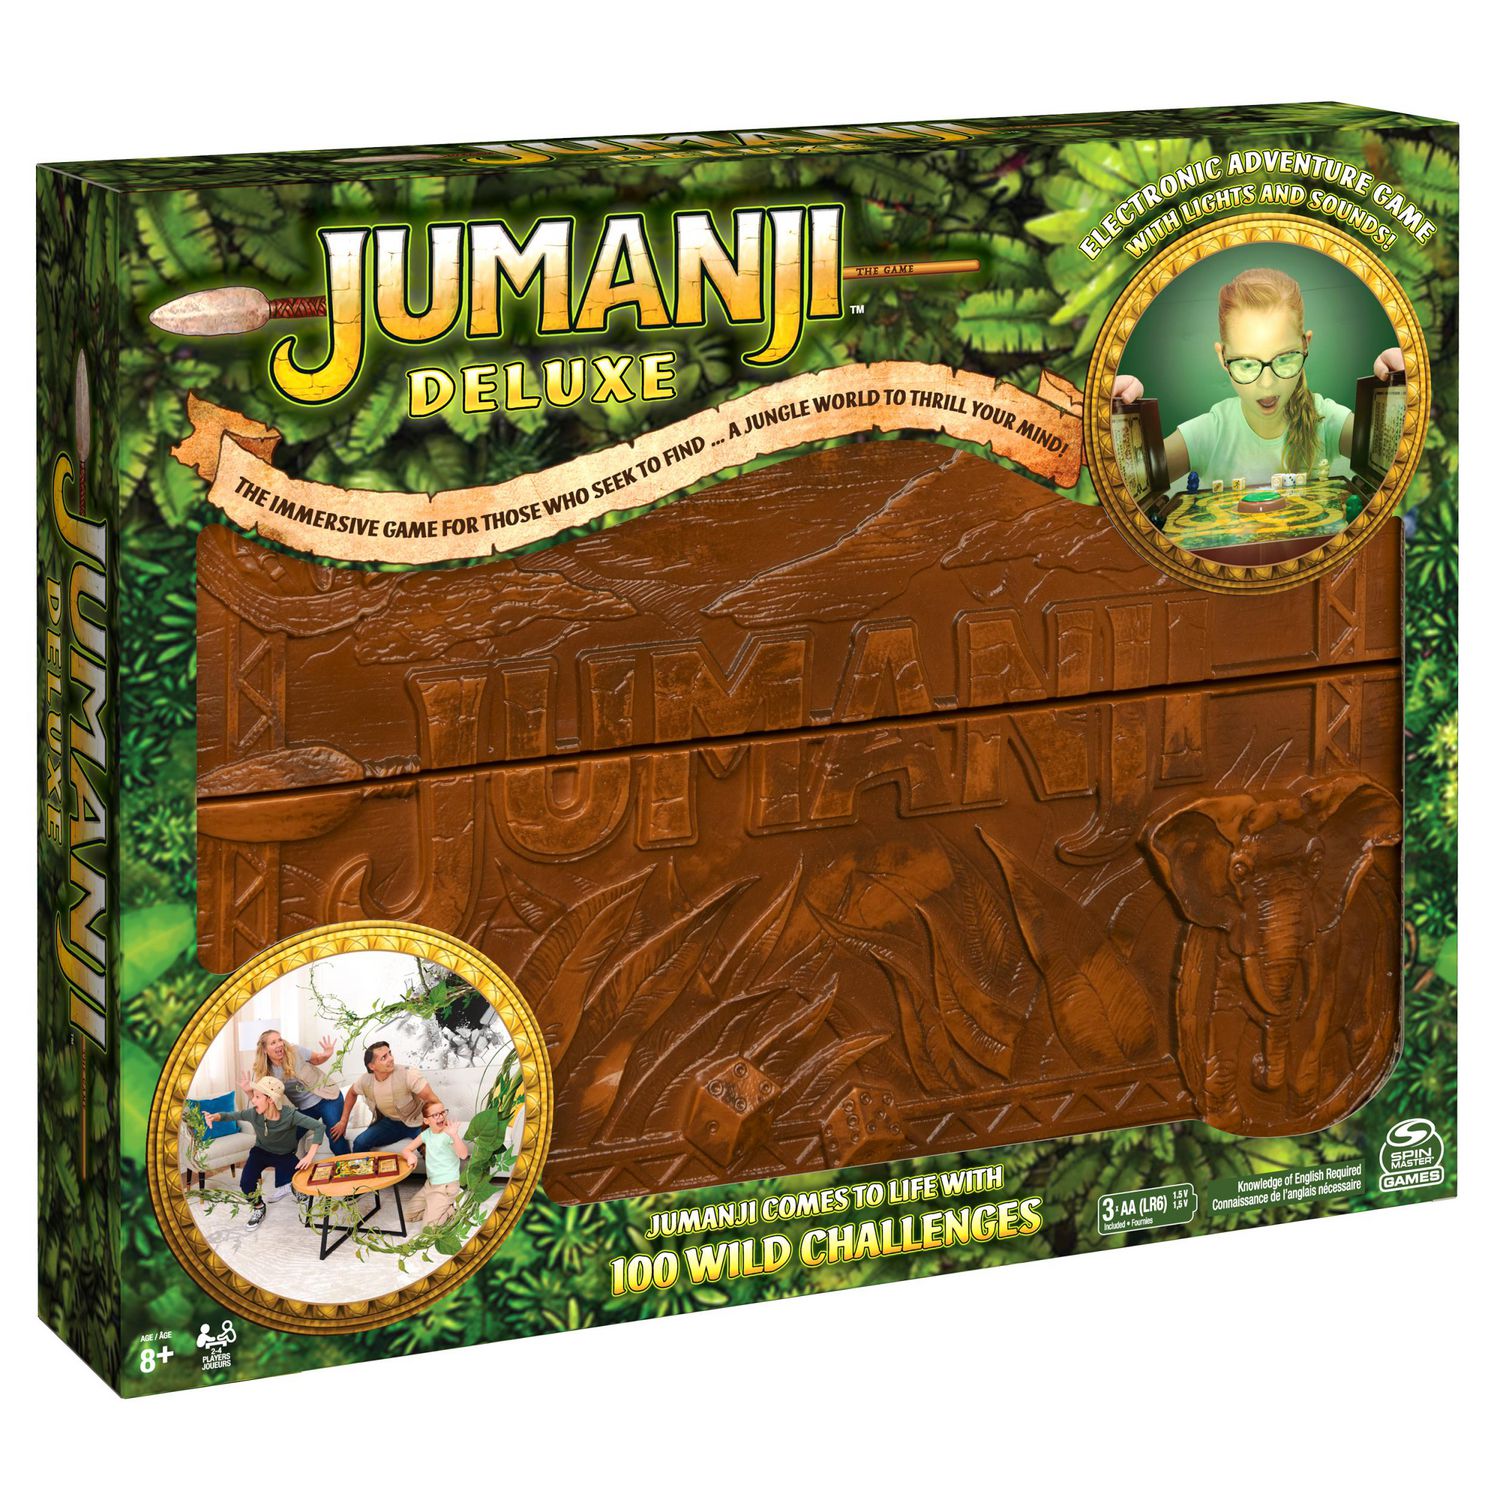 Jumanji Deluxe Game, Immersive Electronic Version of the Classic